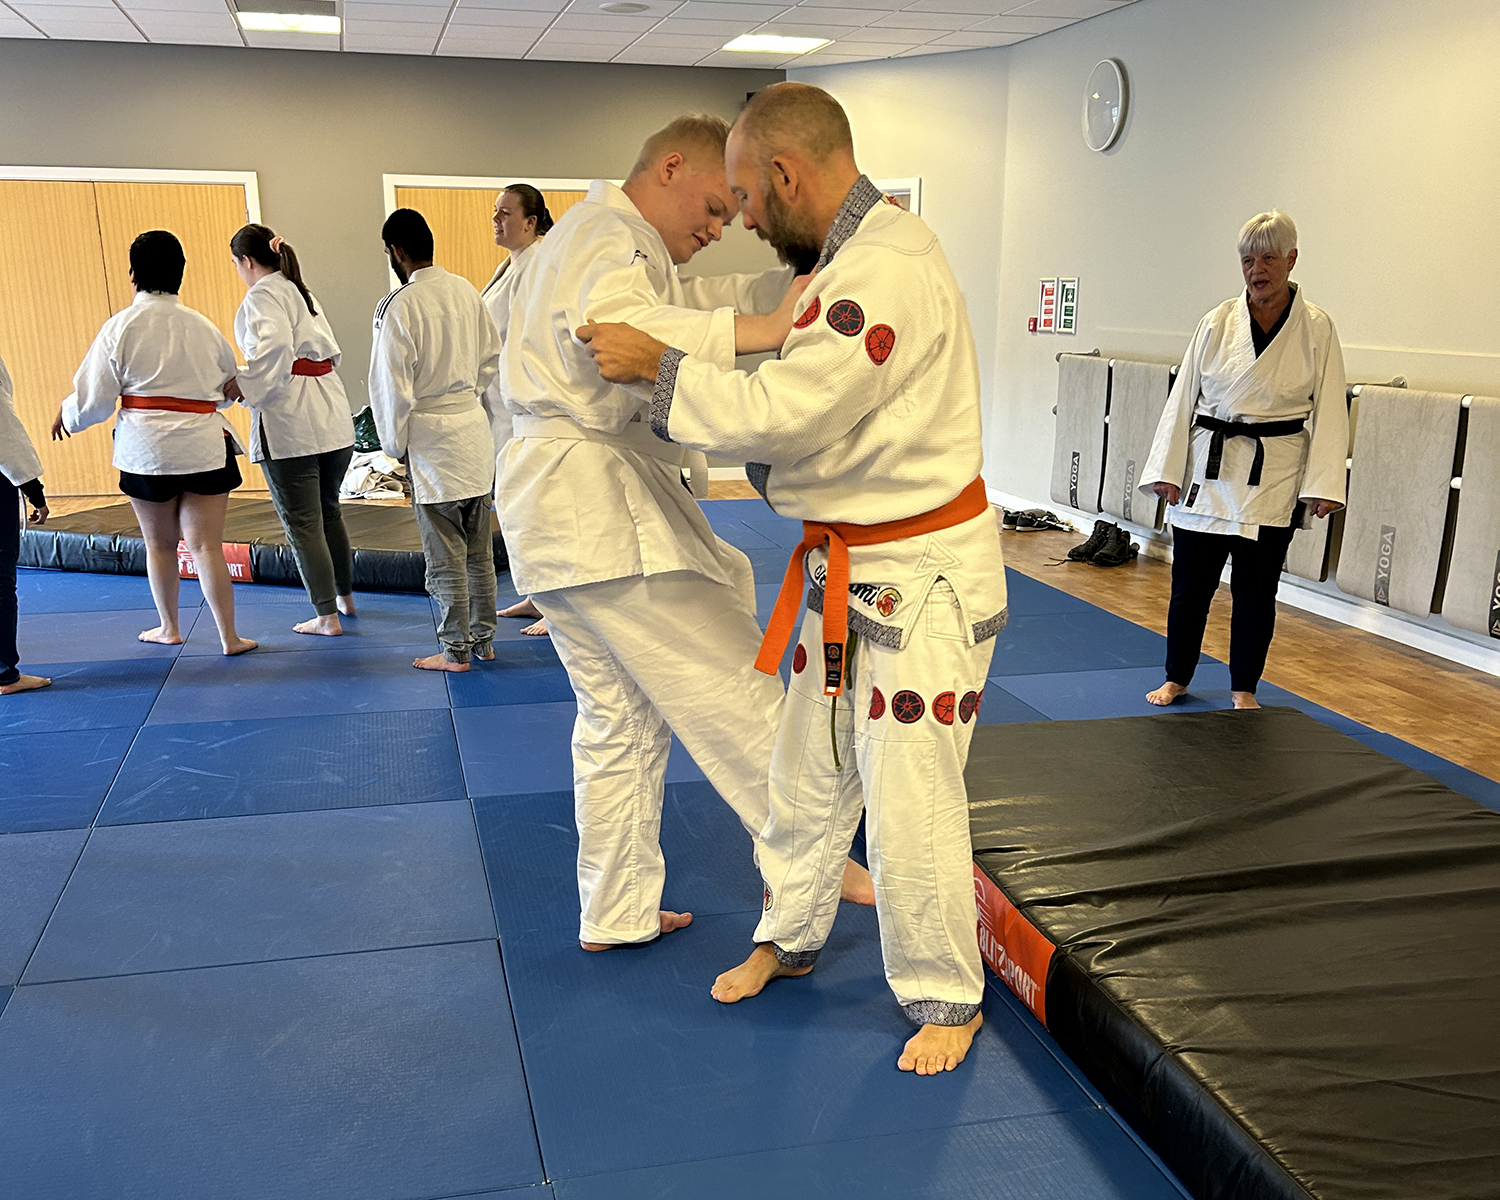 Phil demonstrating one of the throws with a student. Carol watches on and other students can be seen in the background 